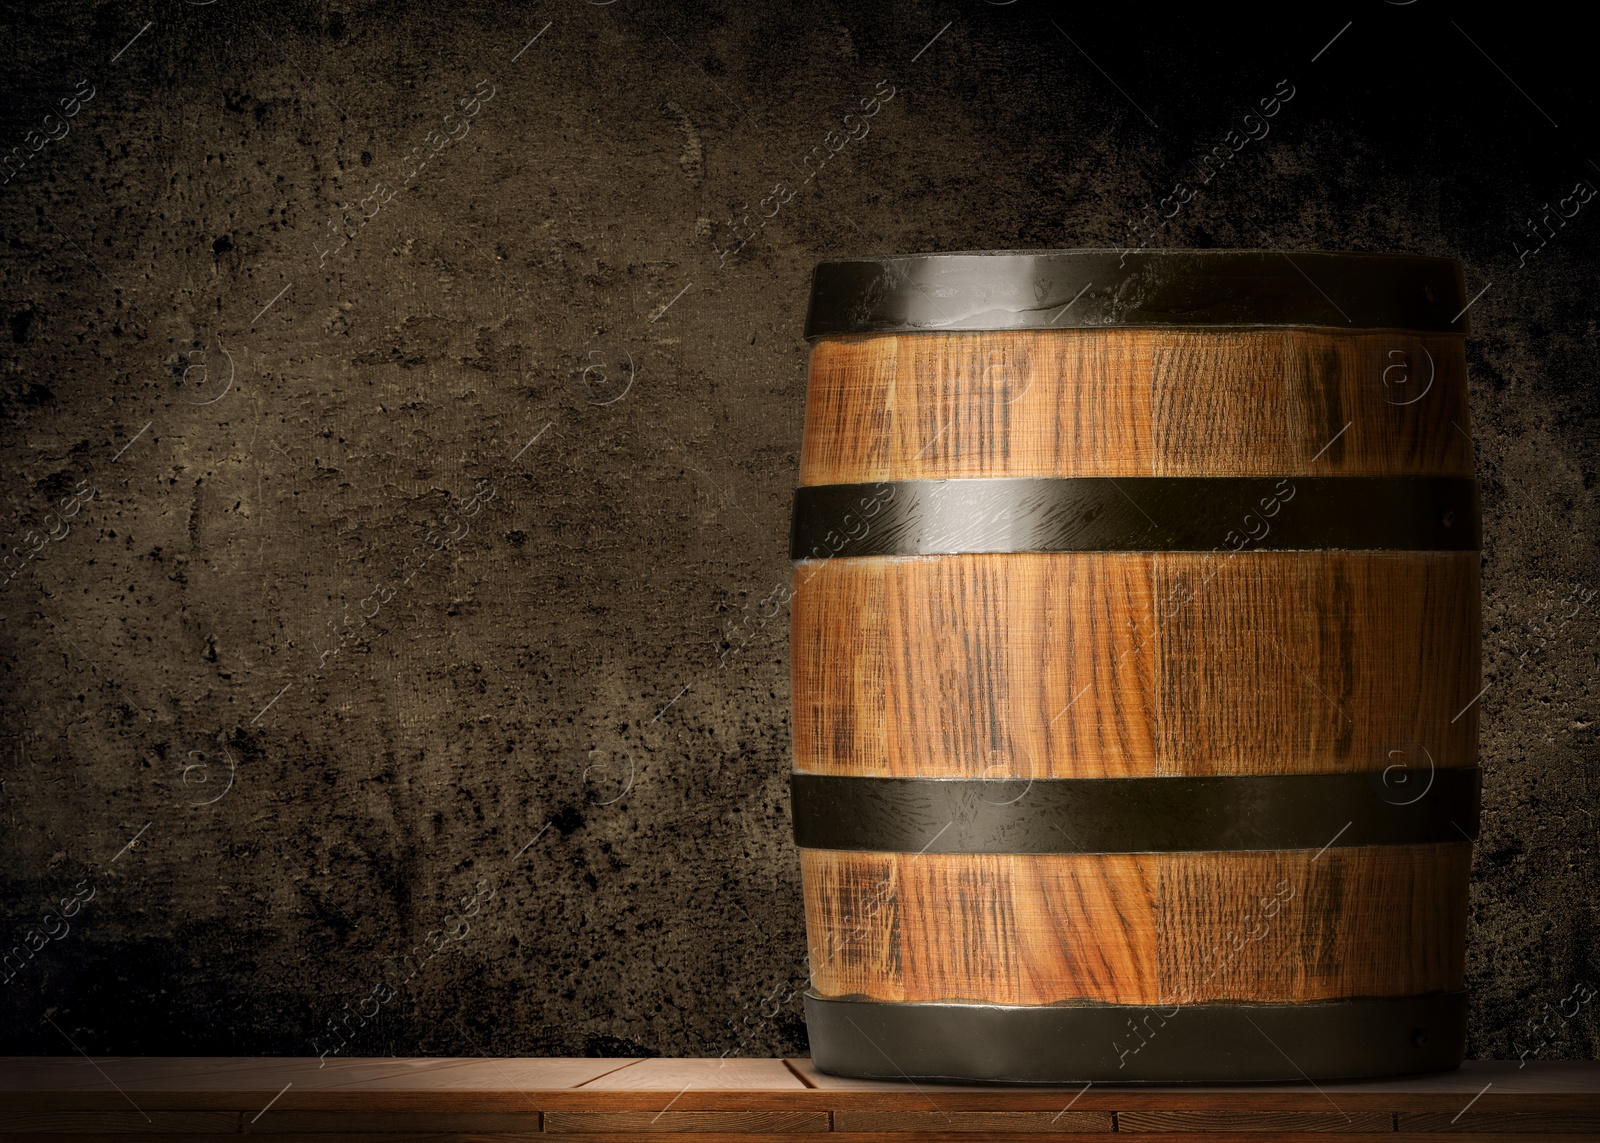 Image of One wooden barrel against dark textured background, space for text